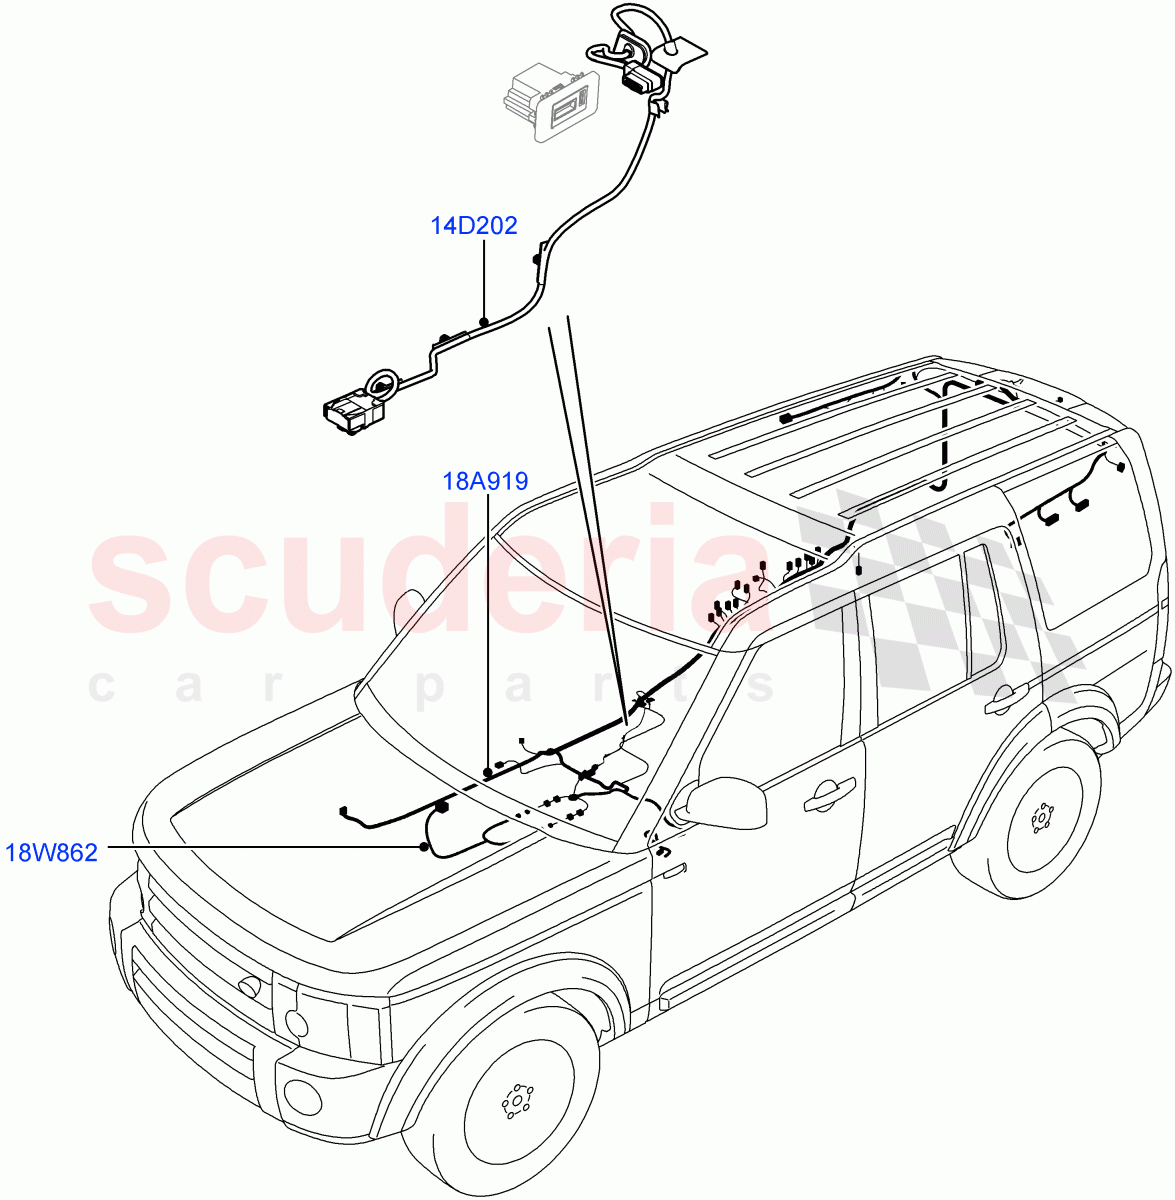 Electrical Wiring - Body And Rear(Audio/Navigation/Entertainment)((V)FROMBA000001,(V)TOBA999999) of Land Rover Land Rover Discovery 4 (2010-2016) [3.0 DOHC GDI SC V6 Petrol]